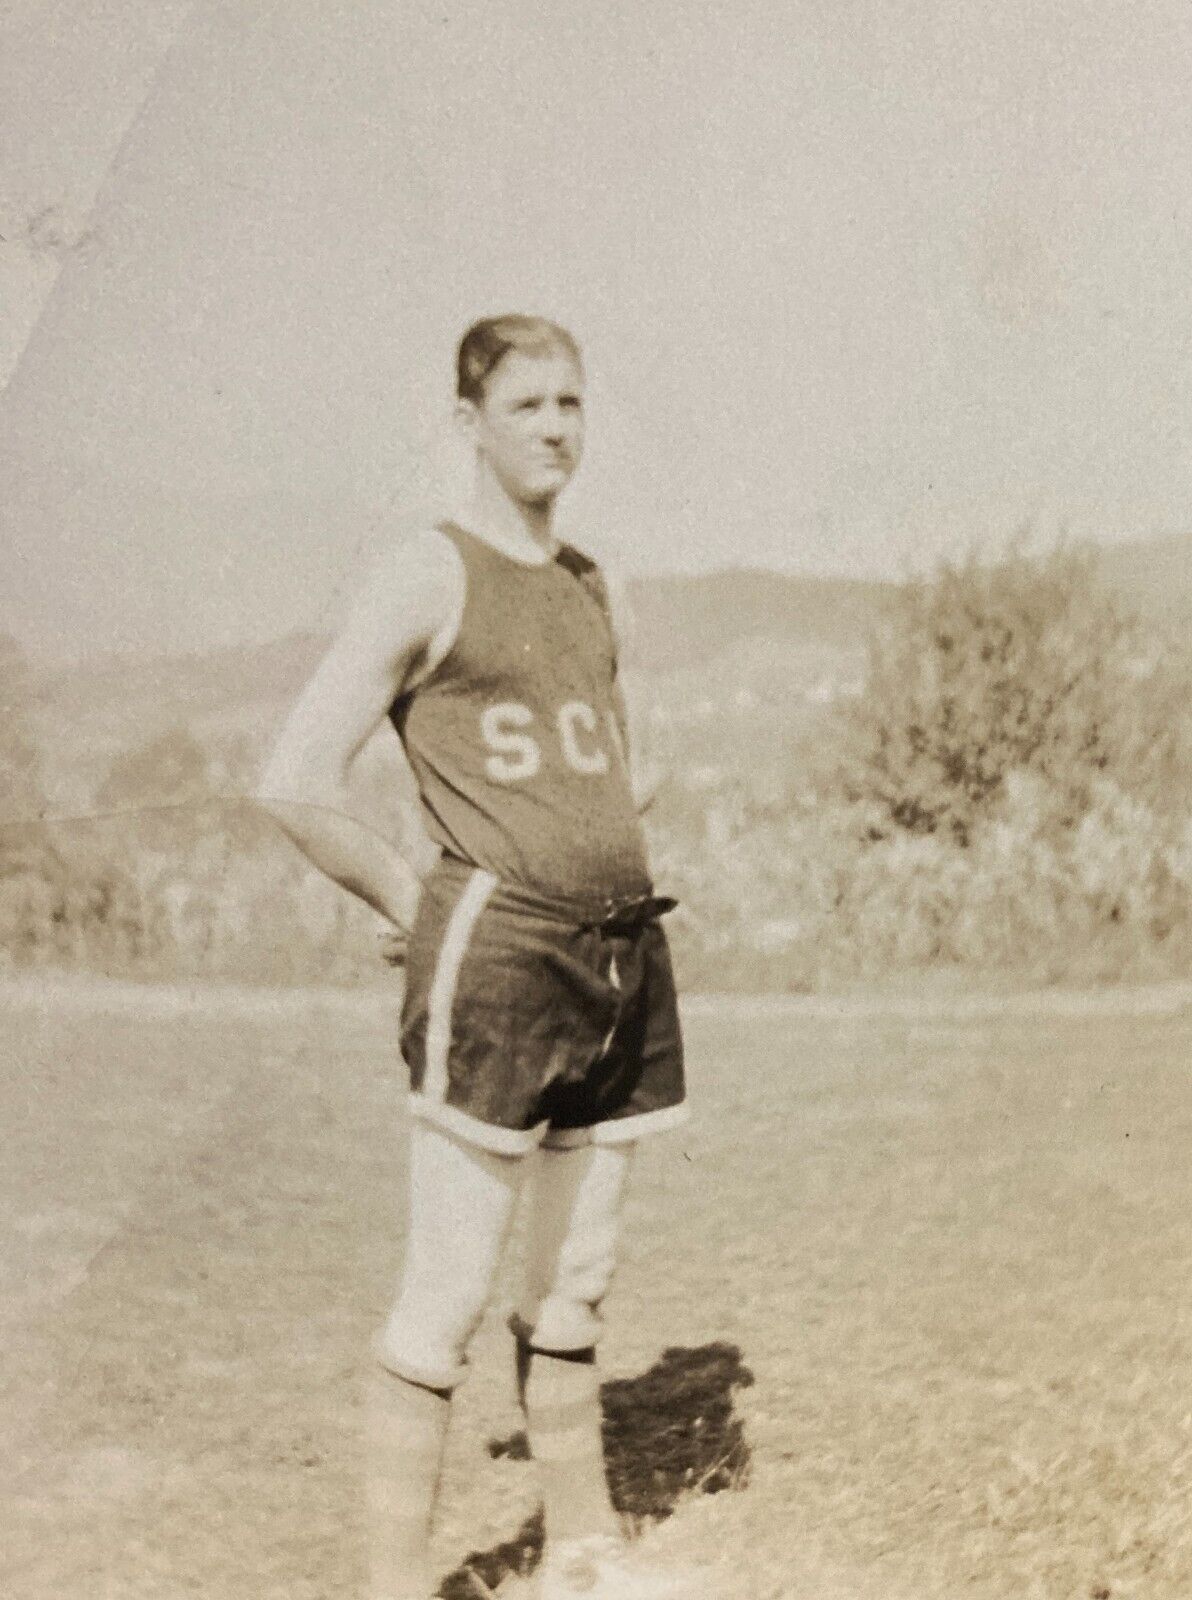 Antique 1920s Photo Handsome Young Man Athlete Runner Track Sports